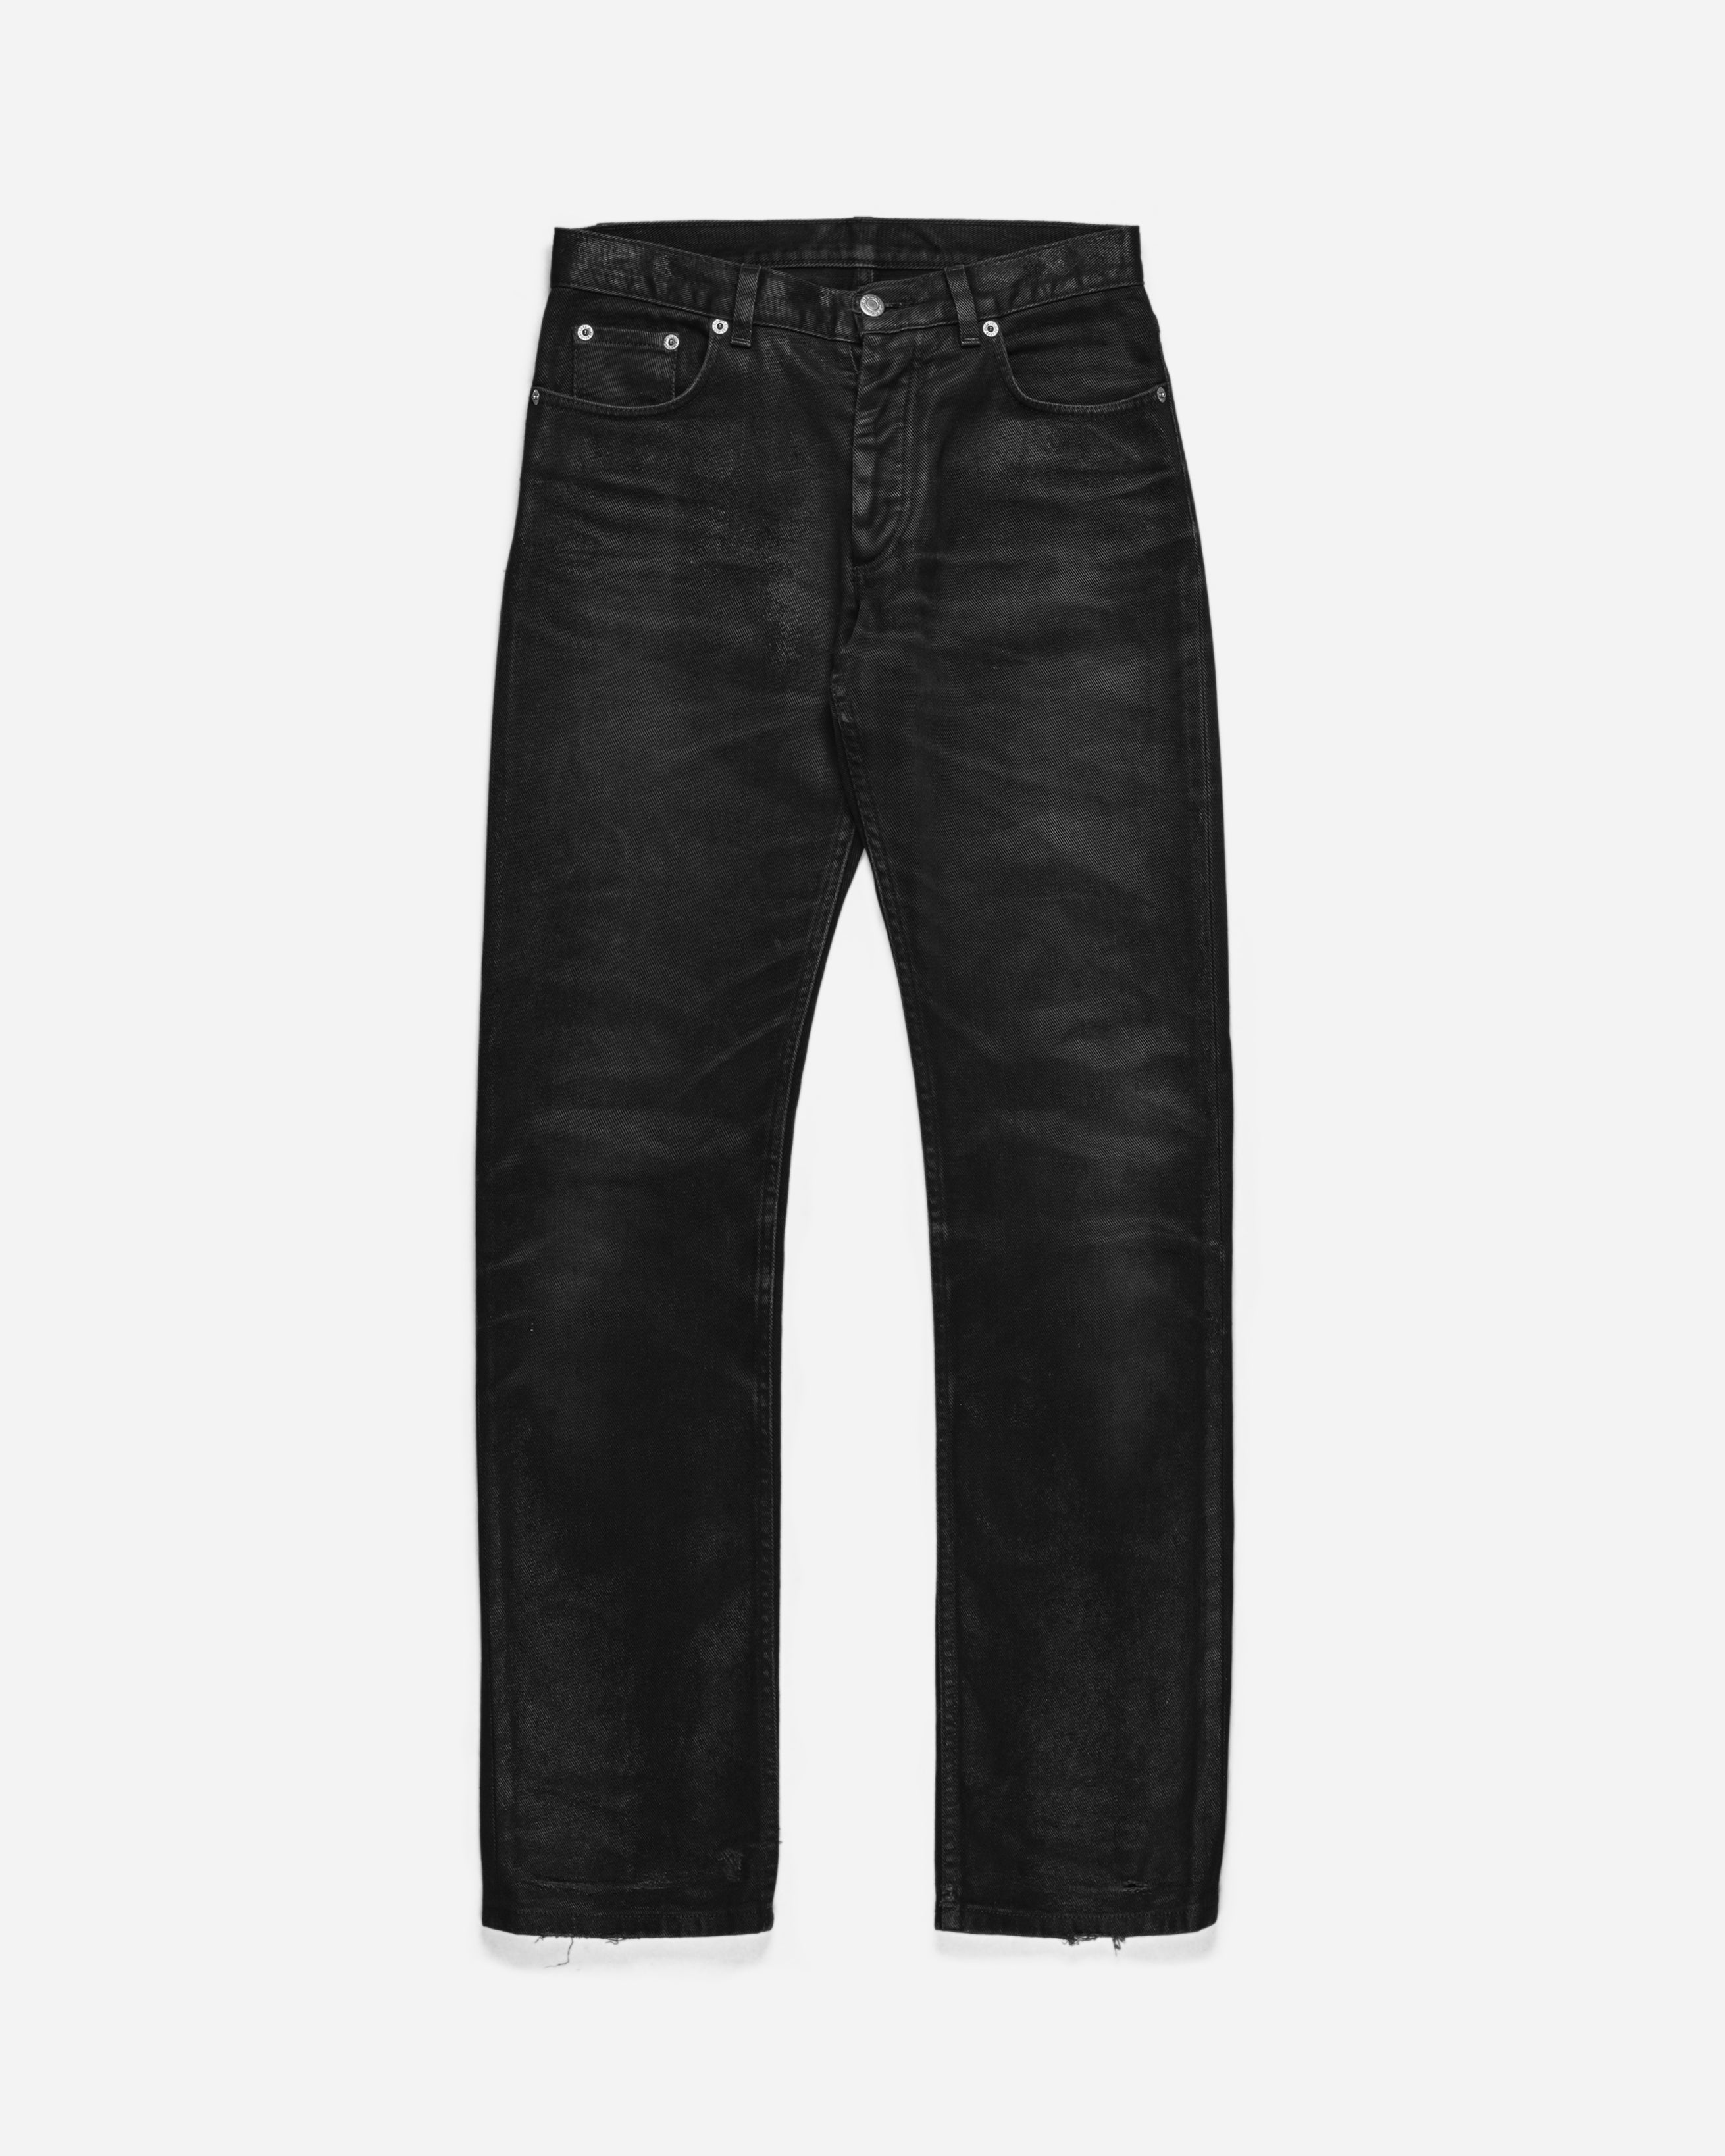 Helmut Lang Black Coated Jeans - AW99